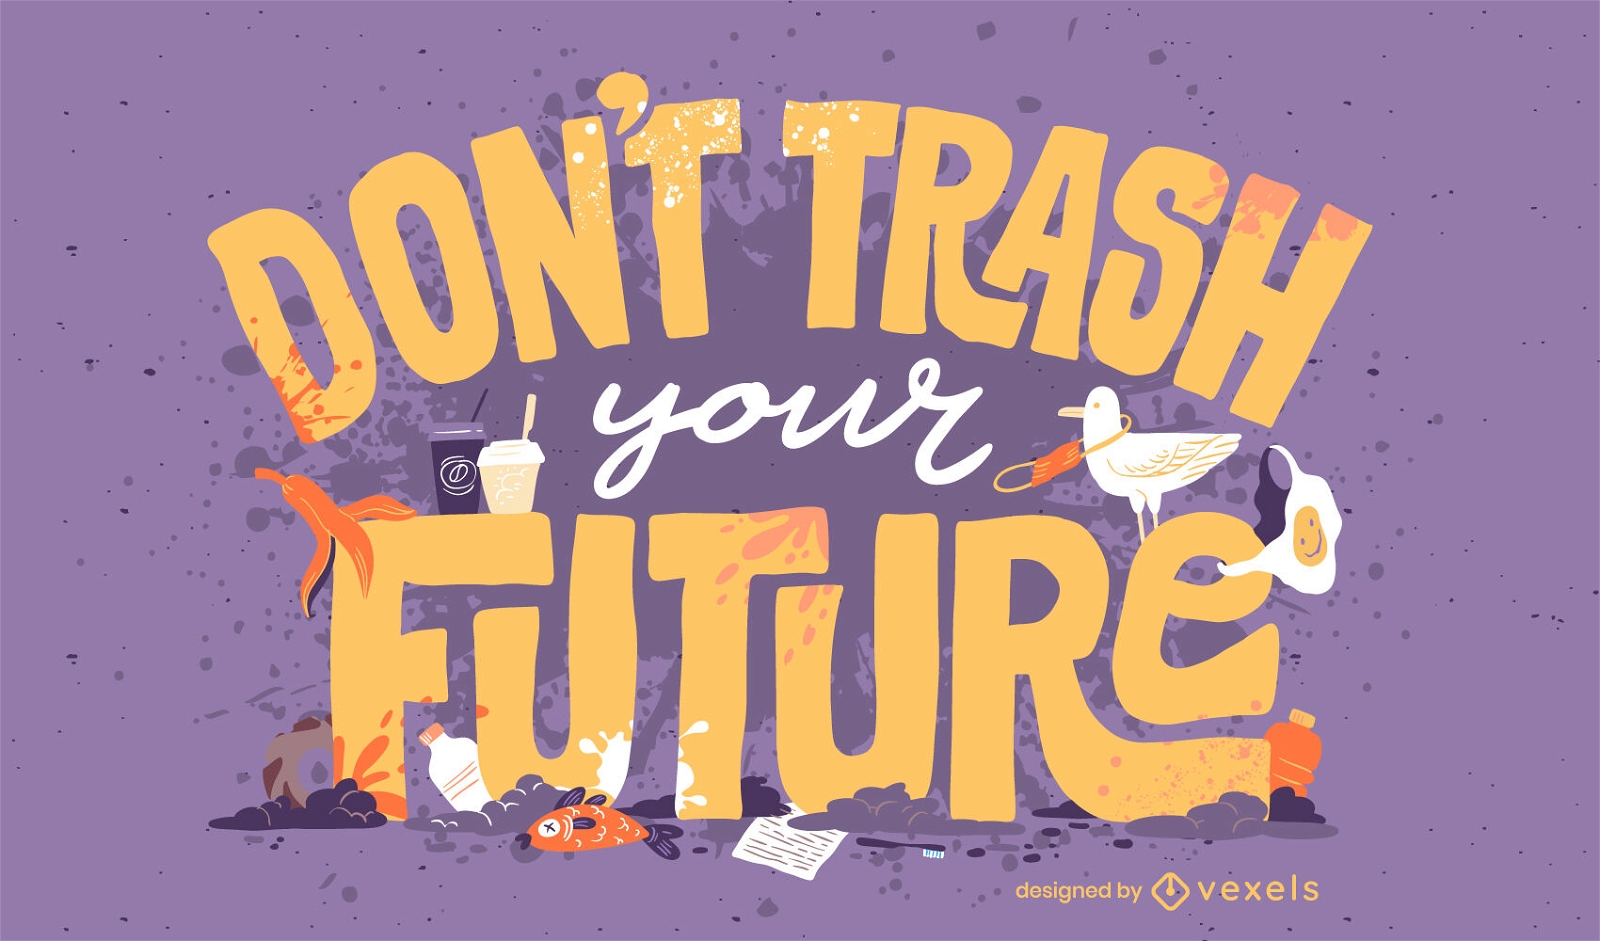 Earth day trash quote lettering